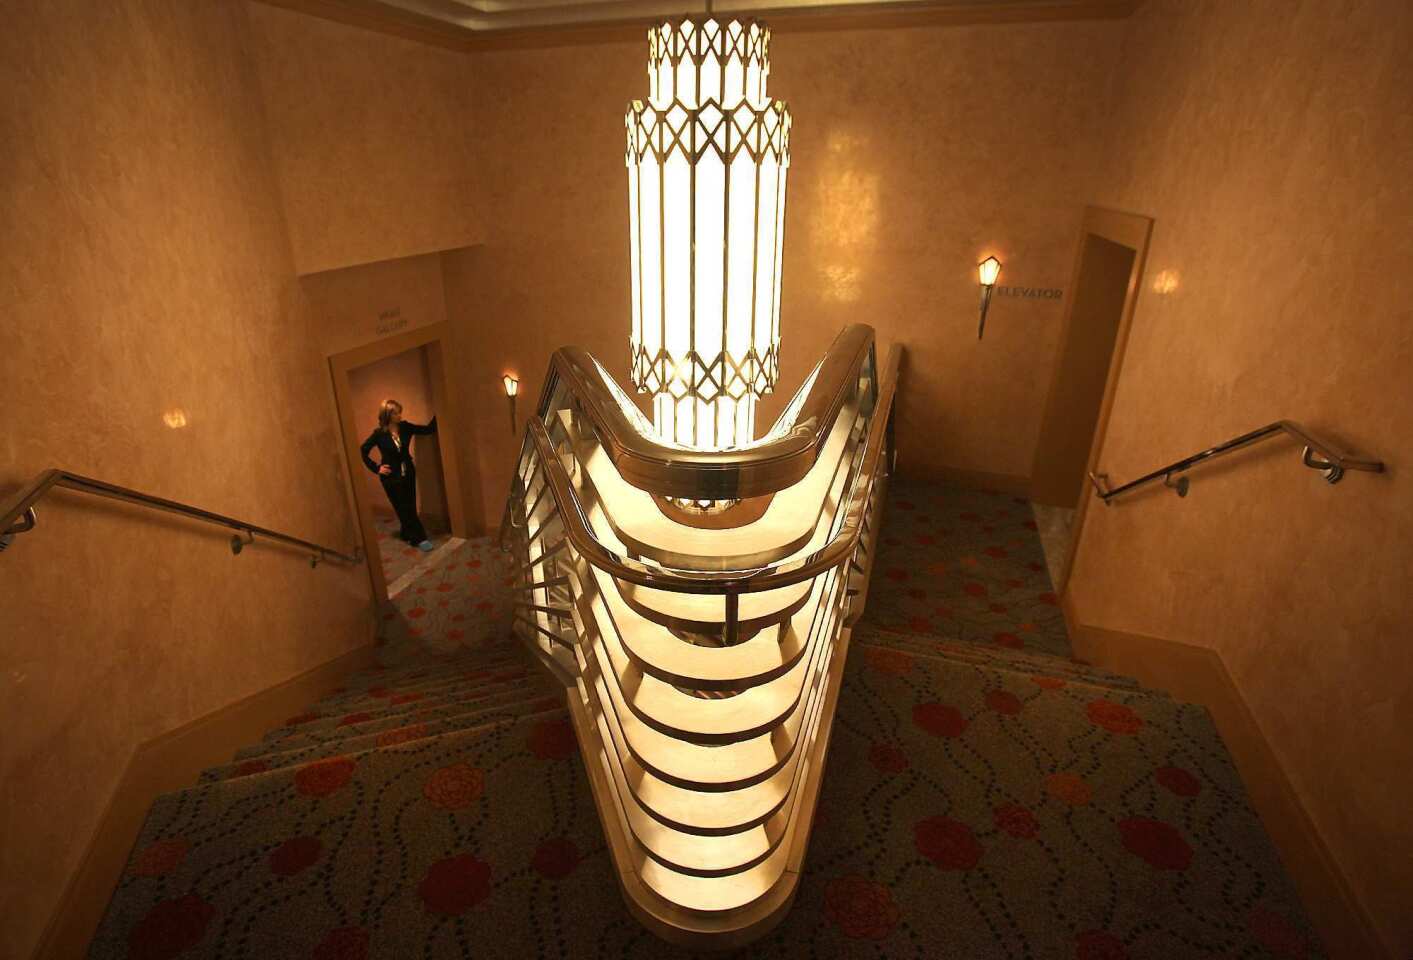 A stairwell at Reynolds Hall boasts Art Deco/Art Moderne details inspired by the Hoover Dam.